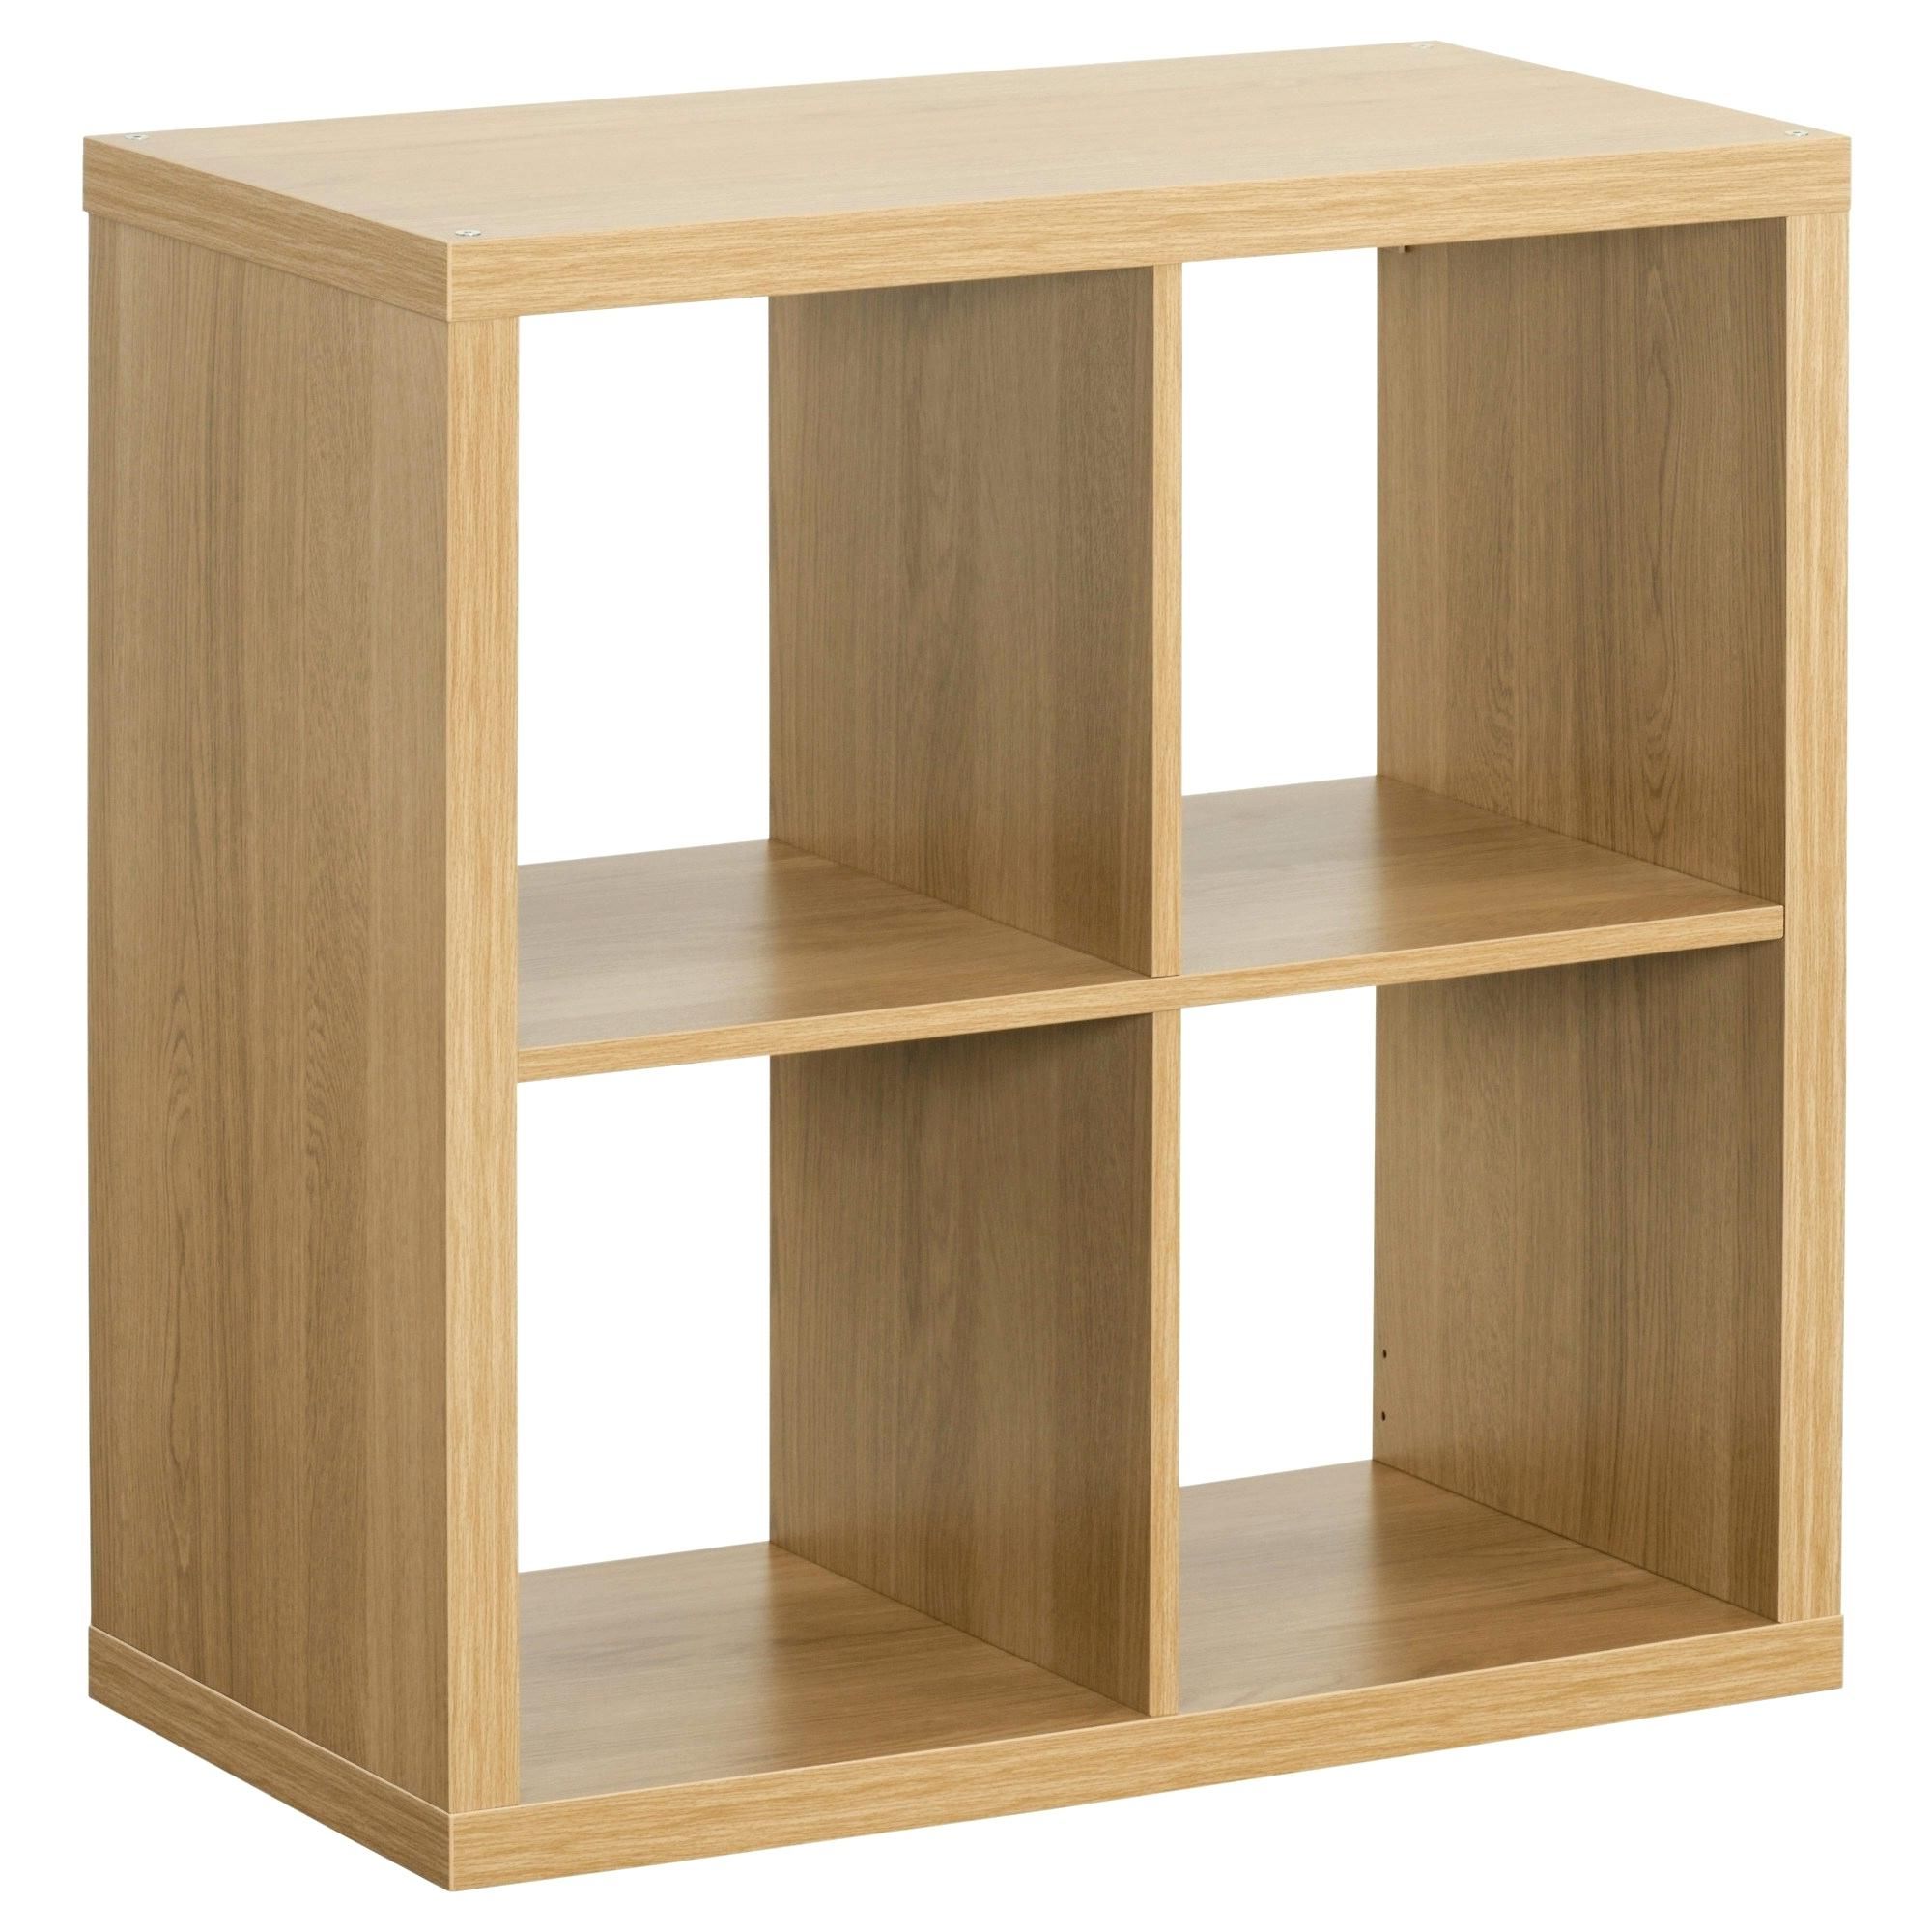 Chastain Storage Cube Unit Bookcases With Regard To Most Current Storage Cube Shelving – Shakirastiverson (View 14 of 20)